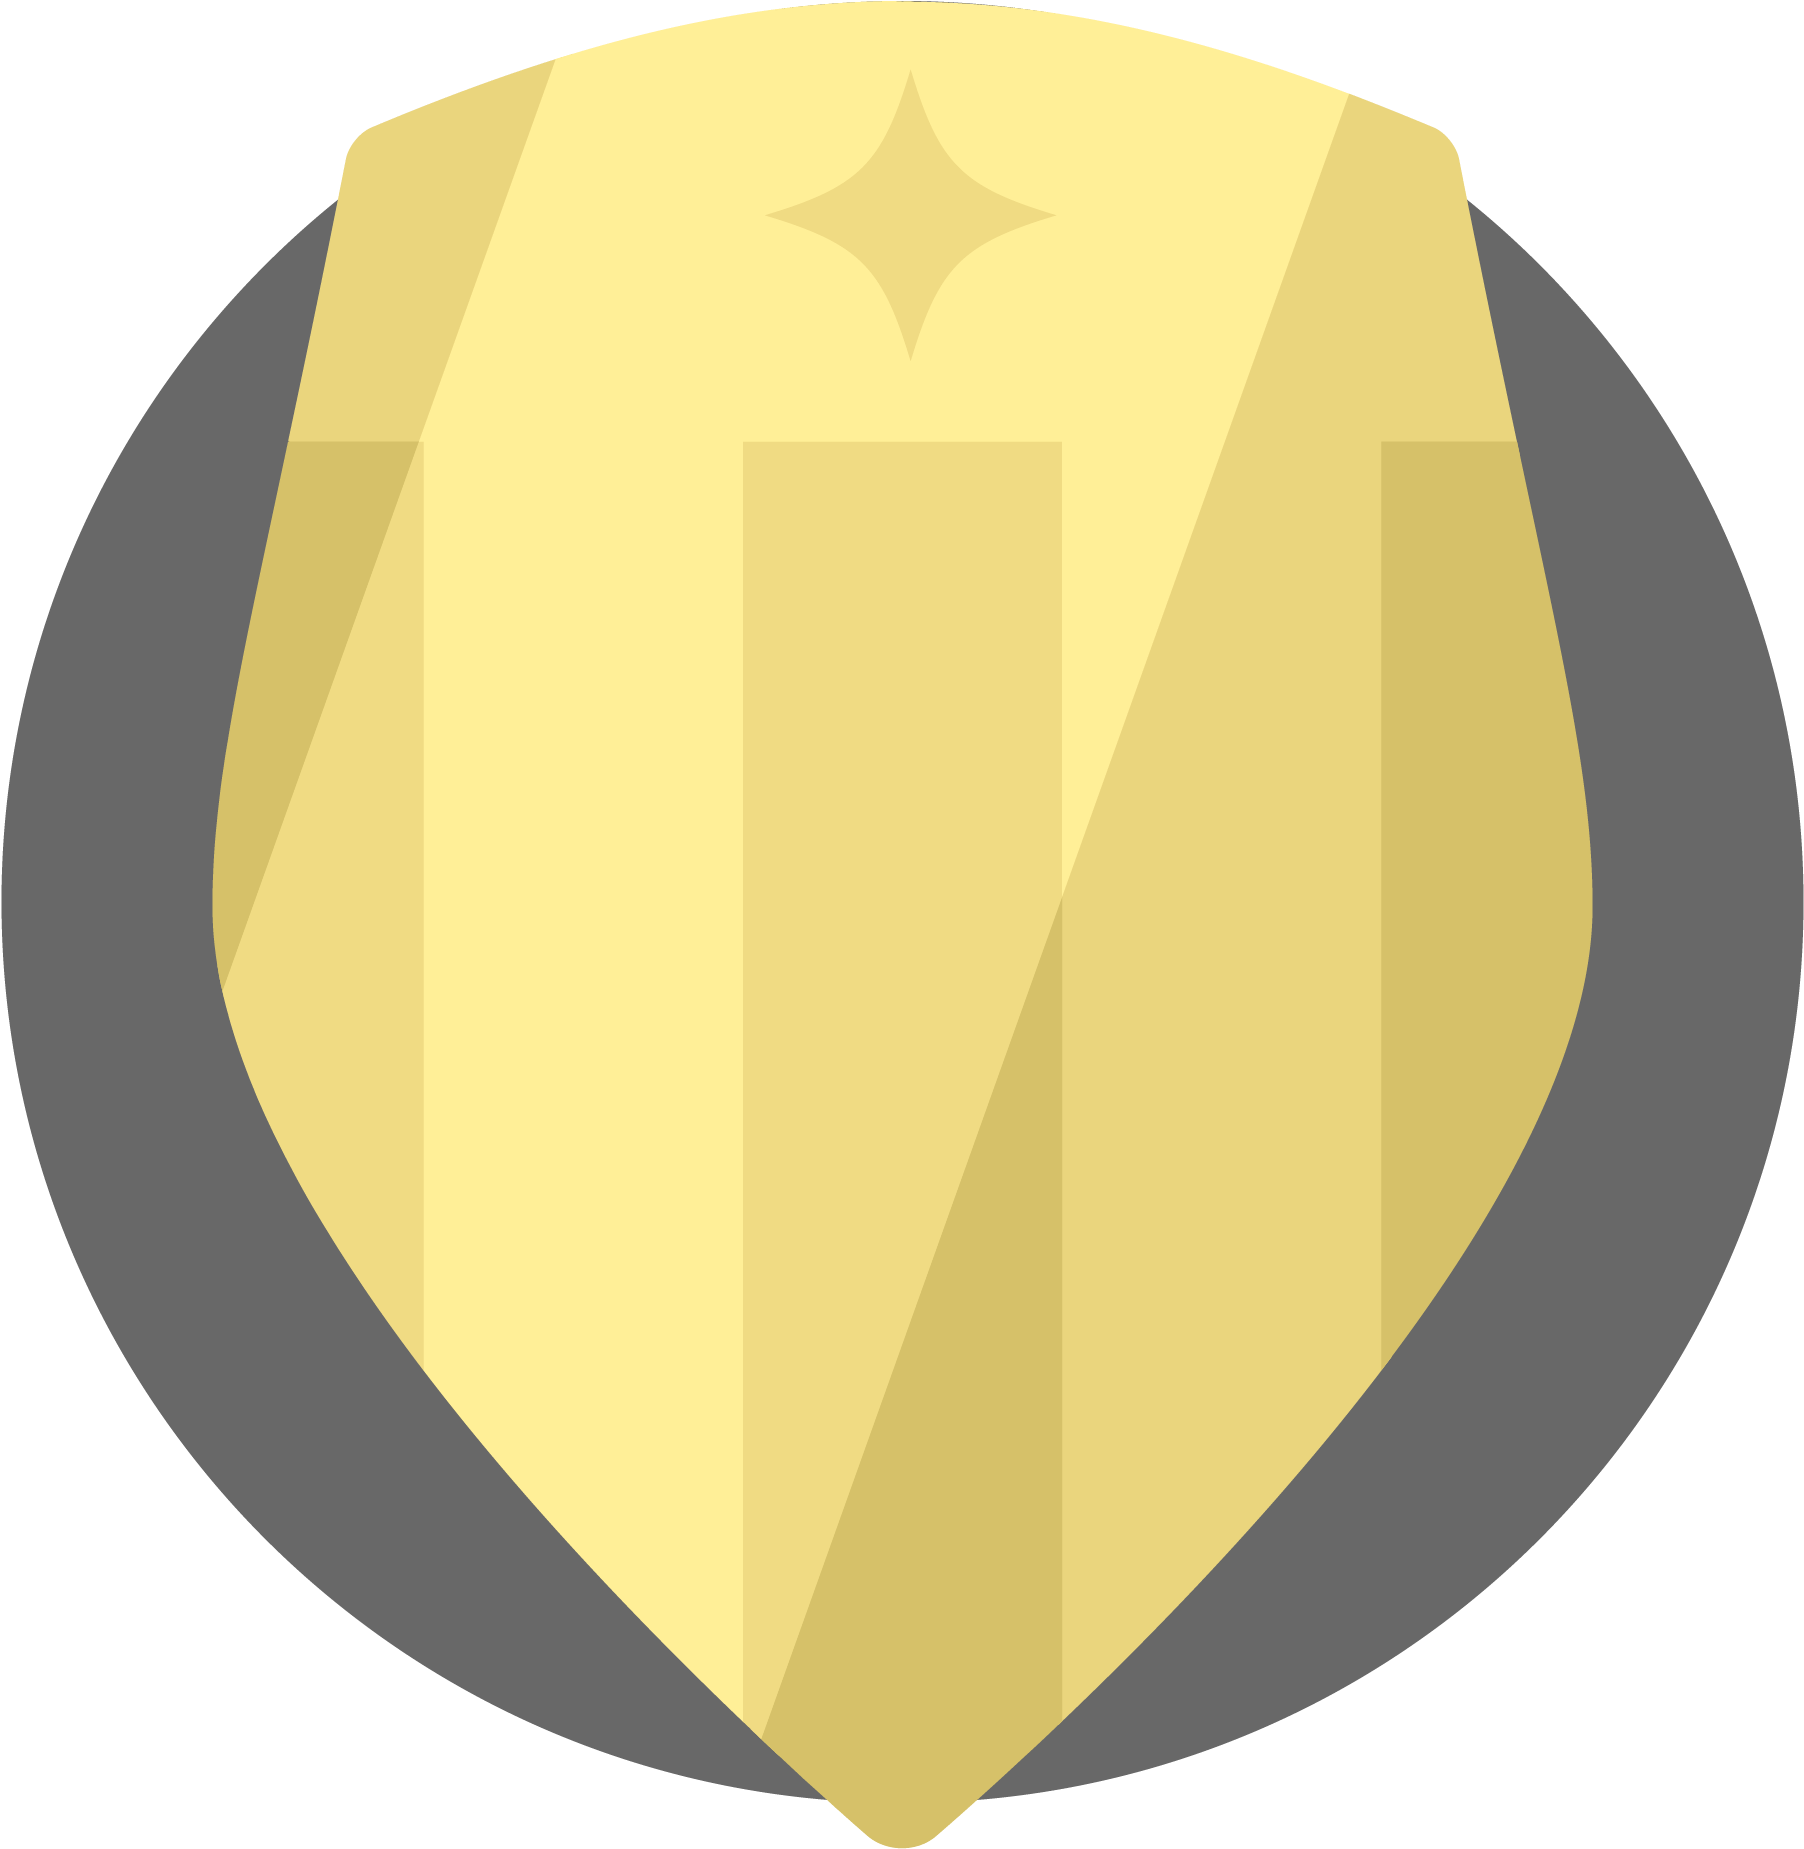 A Yellow Shield With A Star On It